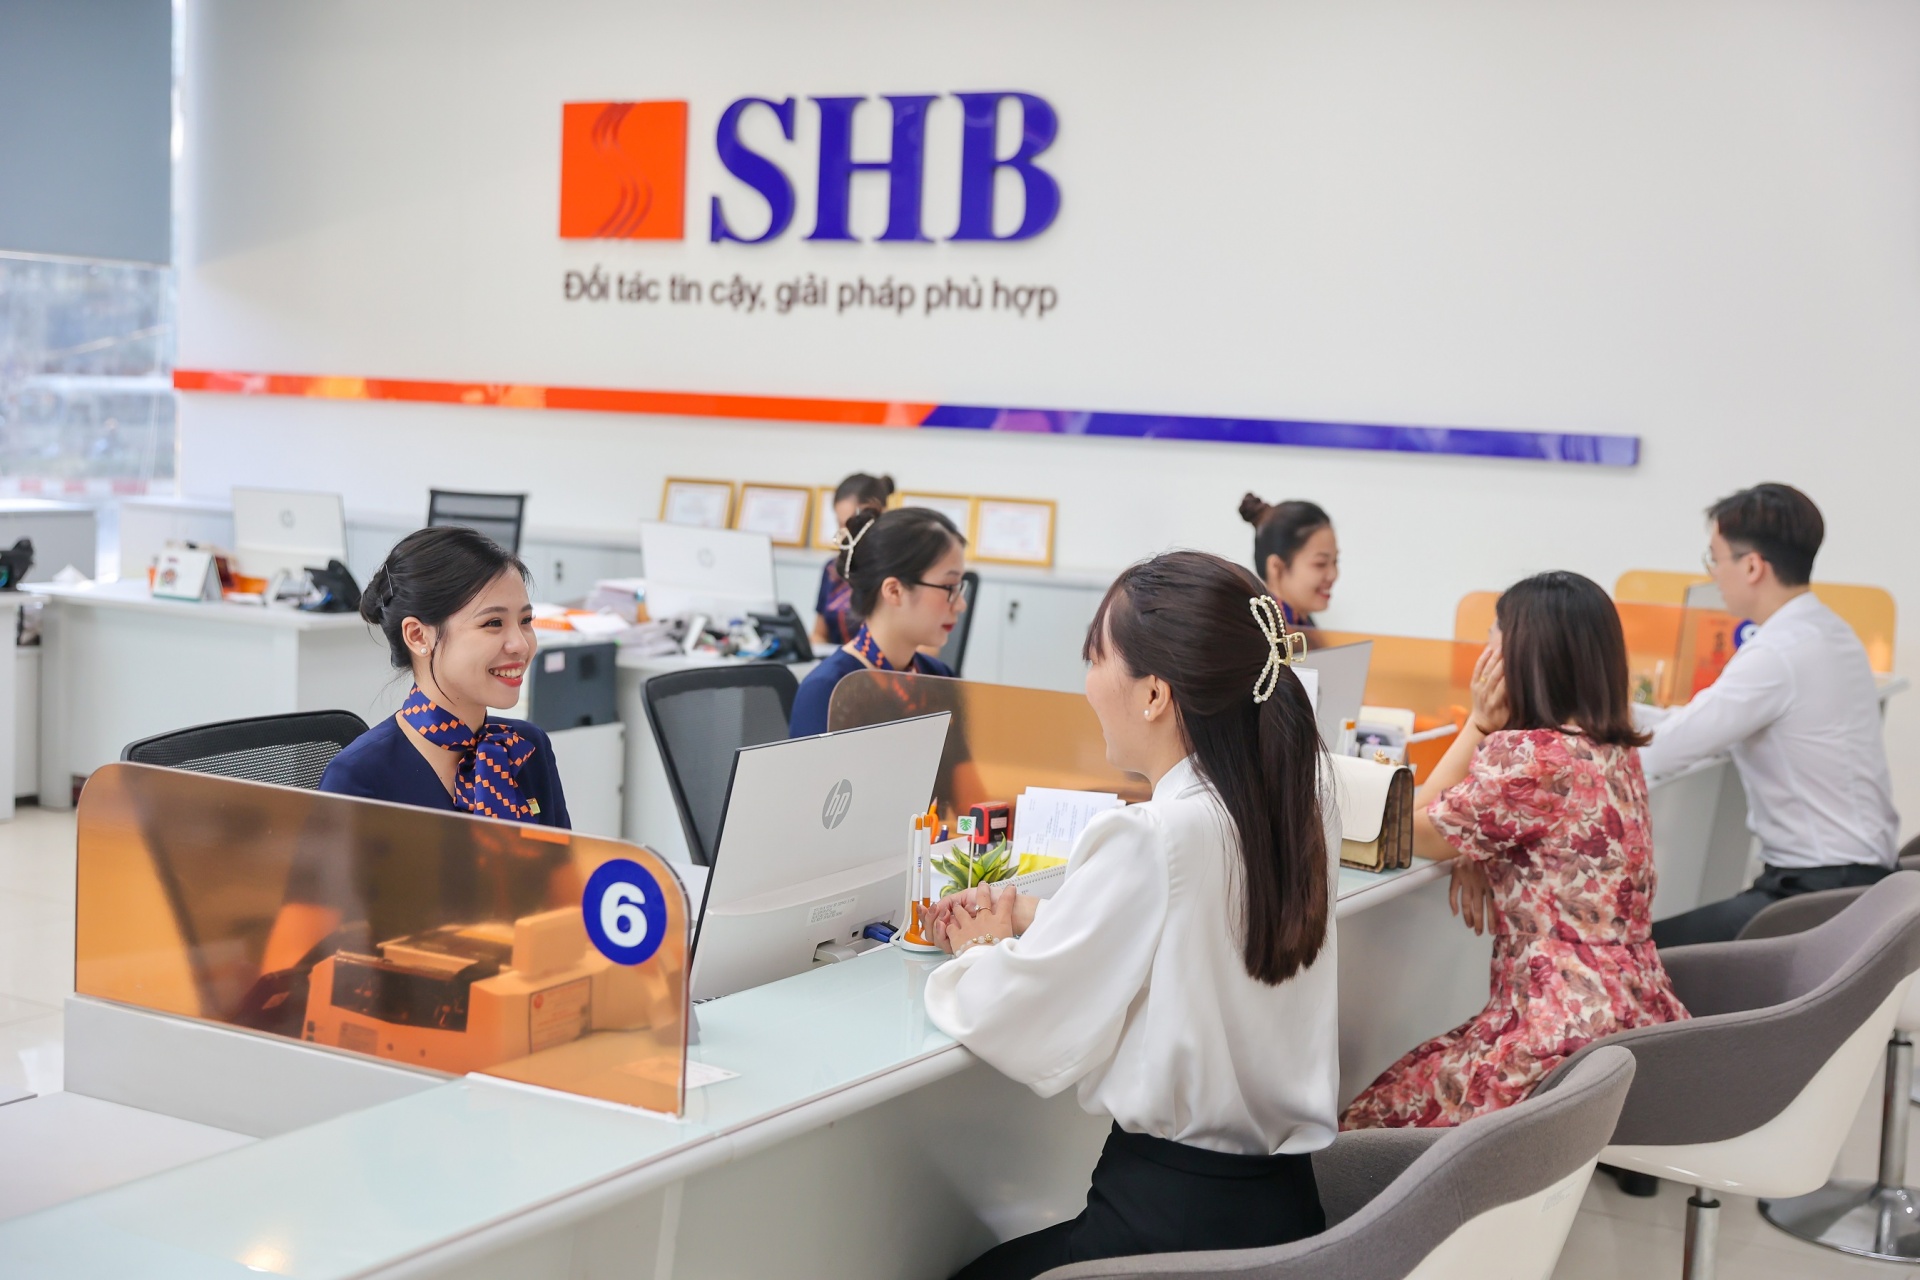 SHB recognised as the bank with the best SME initiative